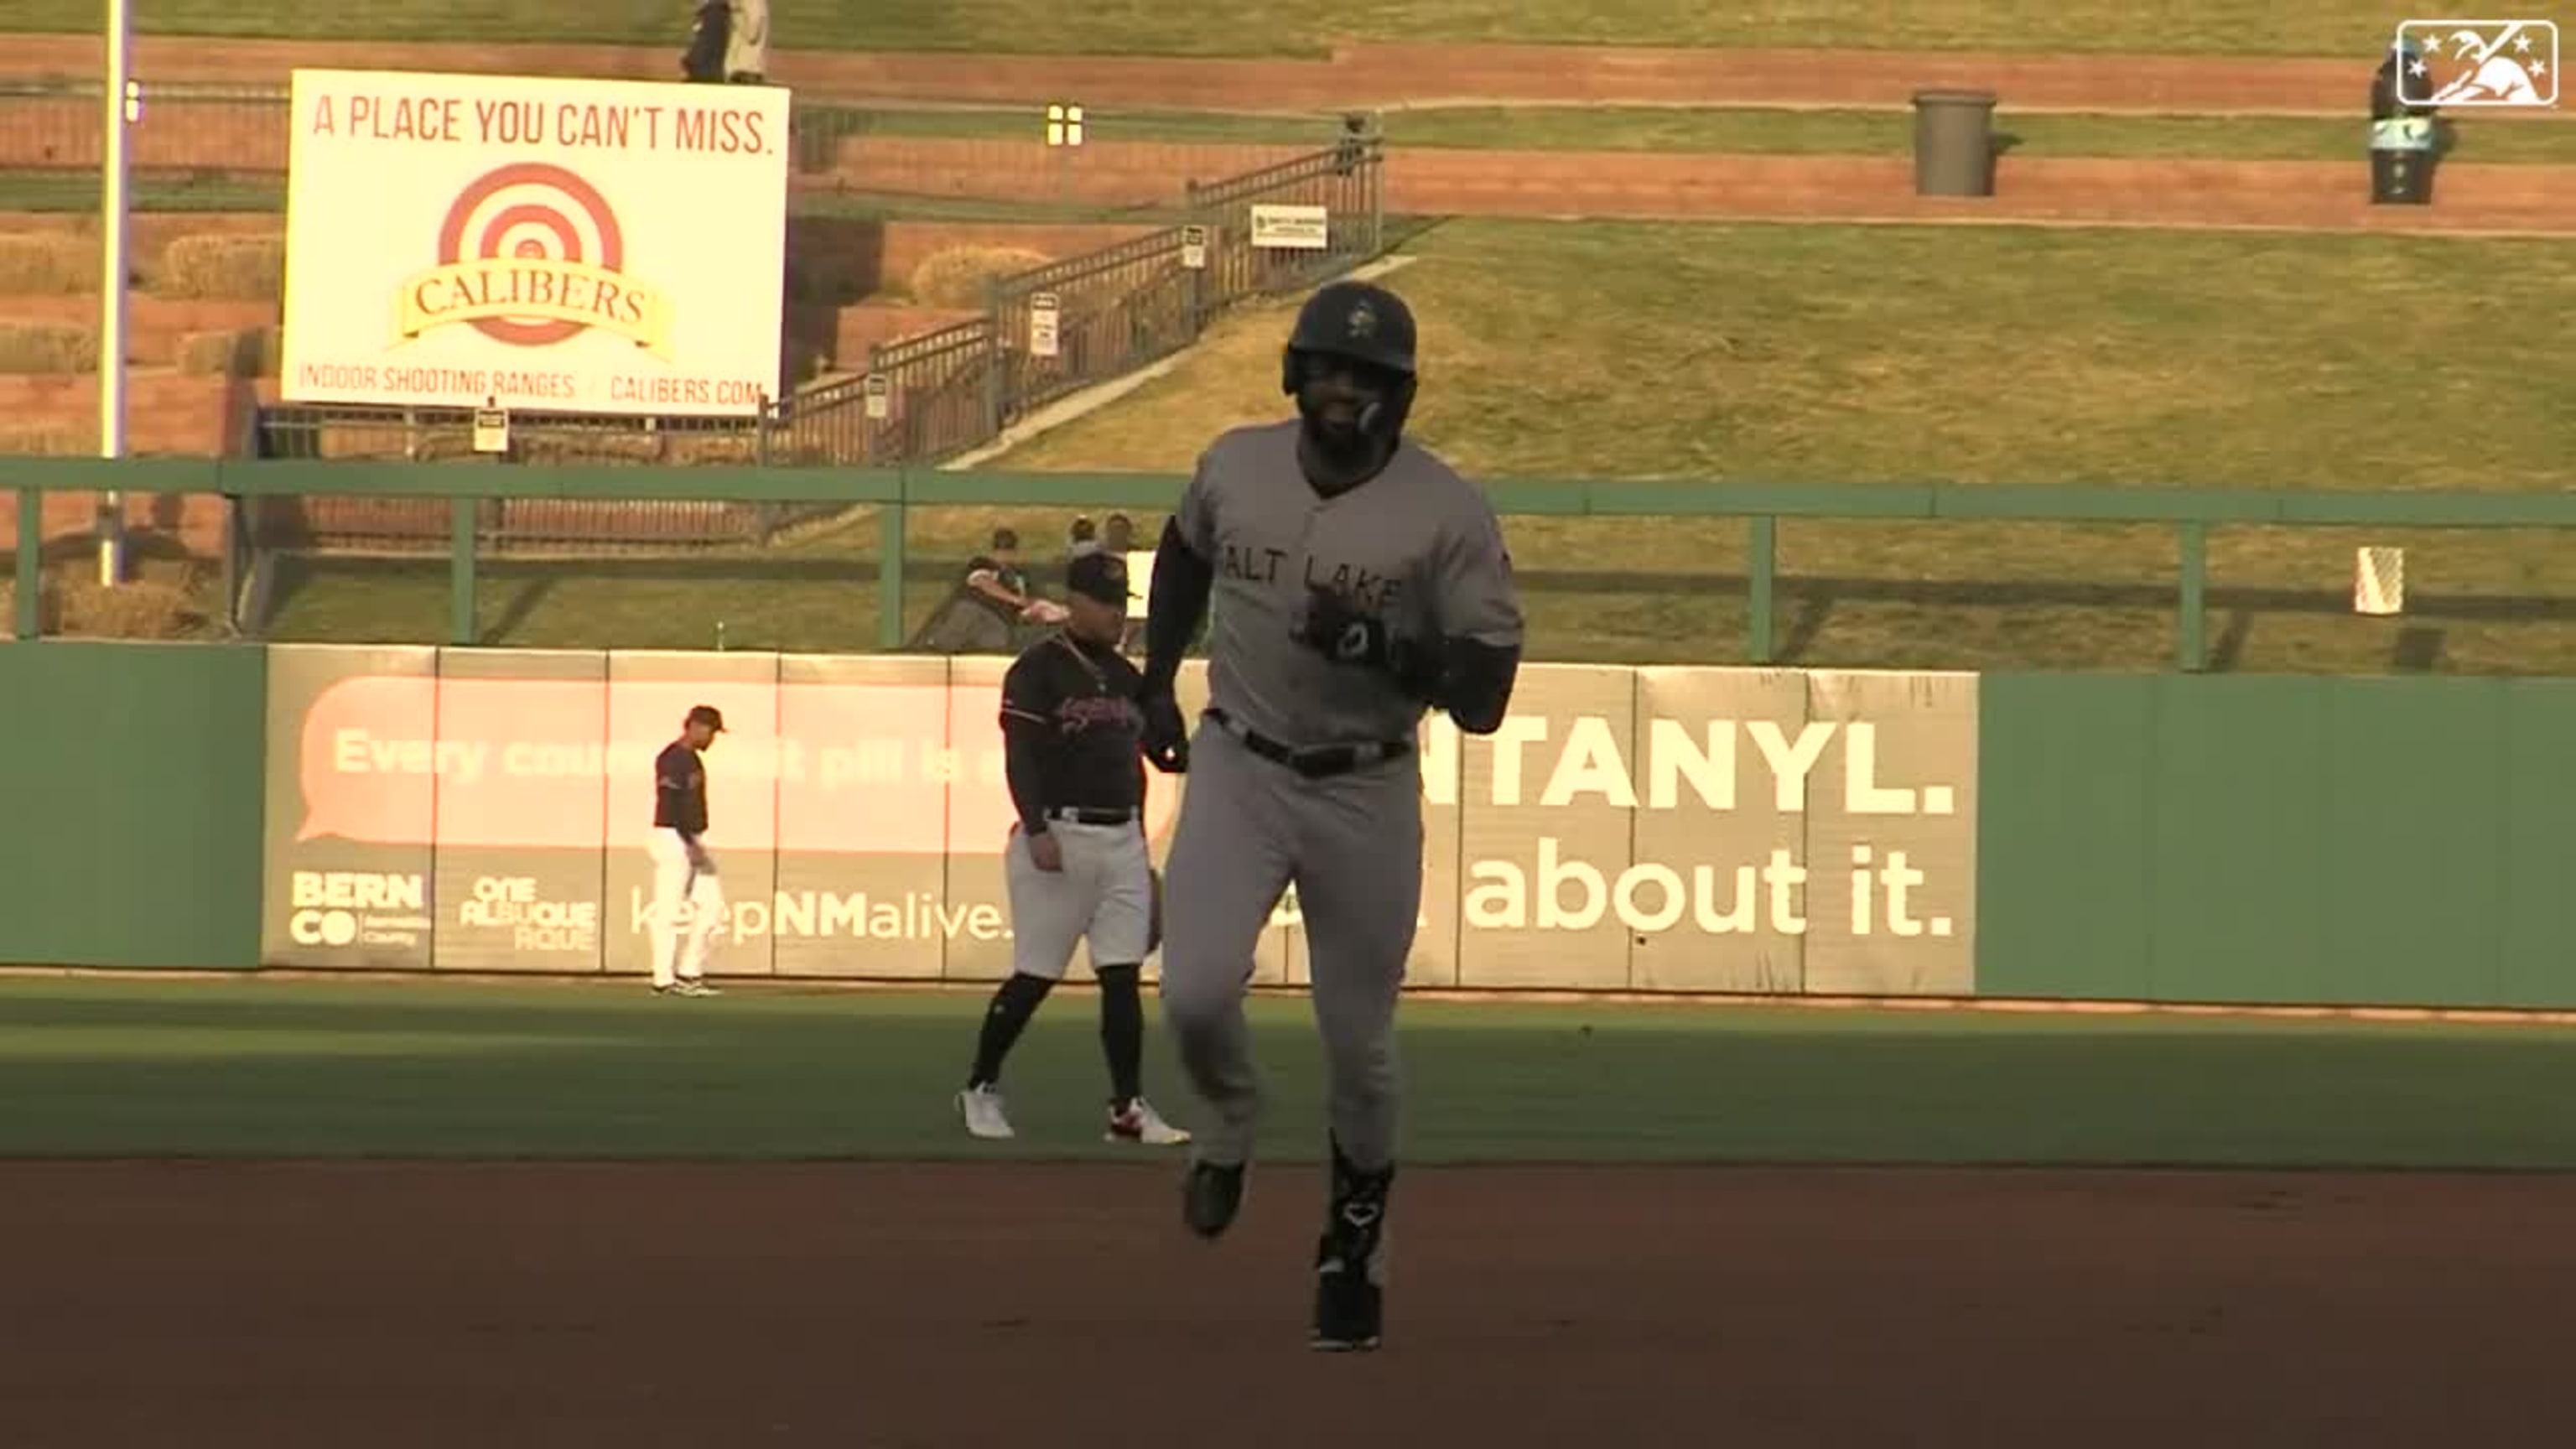 Jo Adell hits home run in fourth straight game for Salt Lake Bees